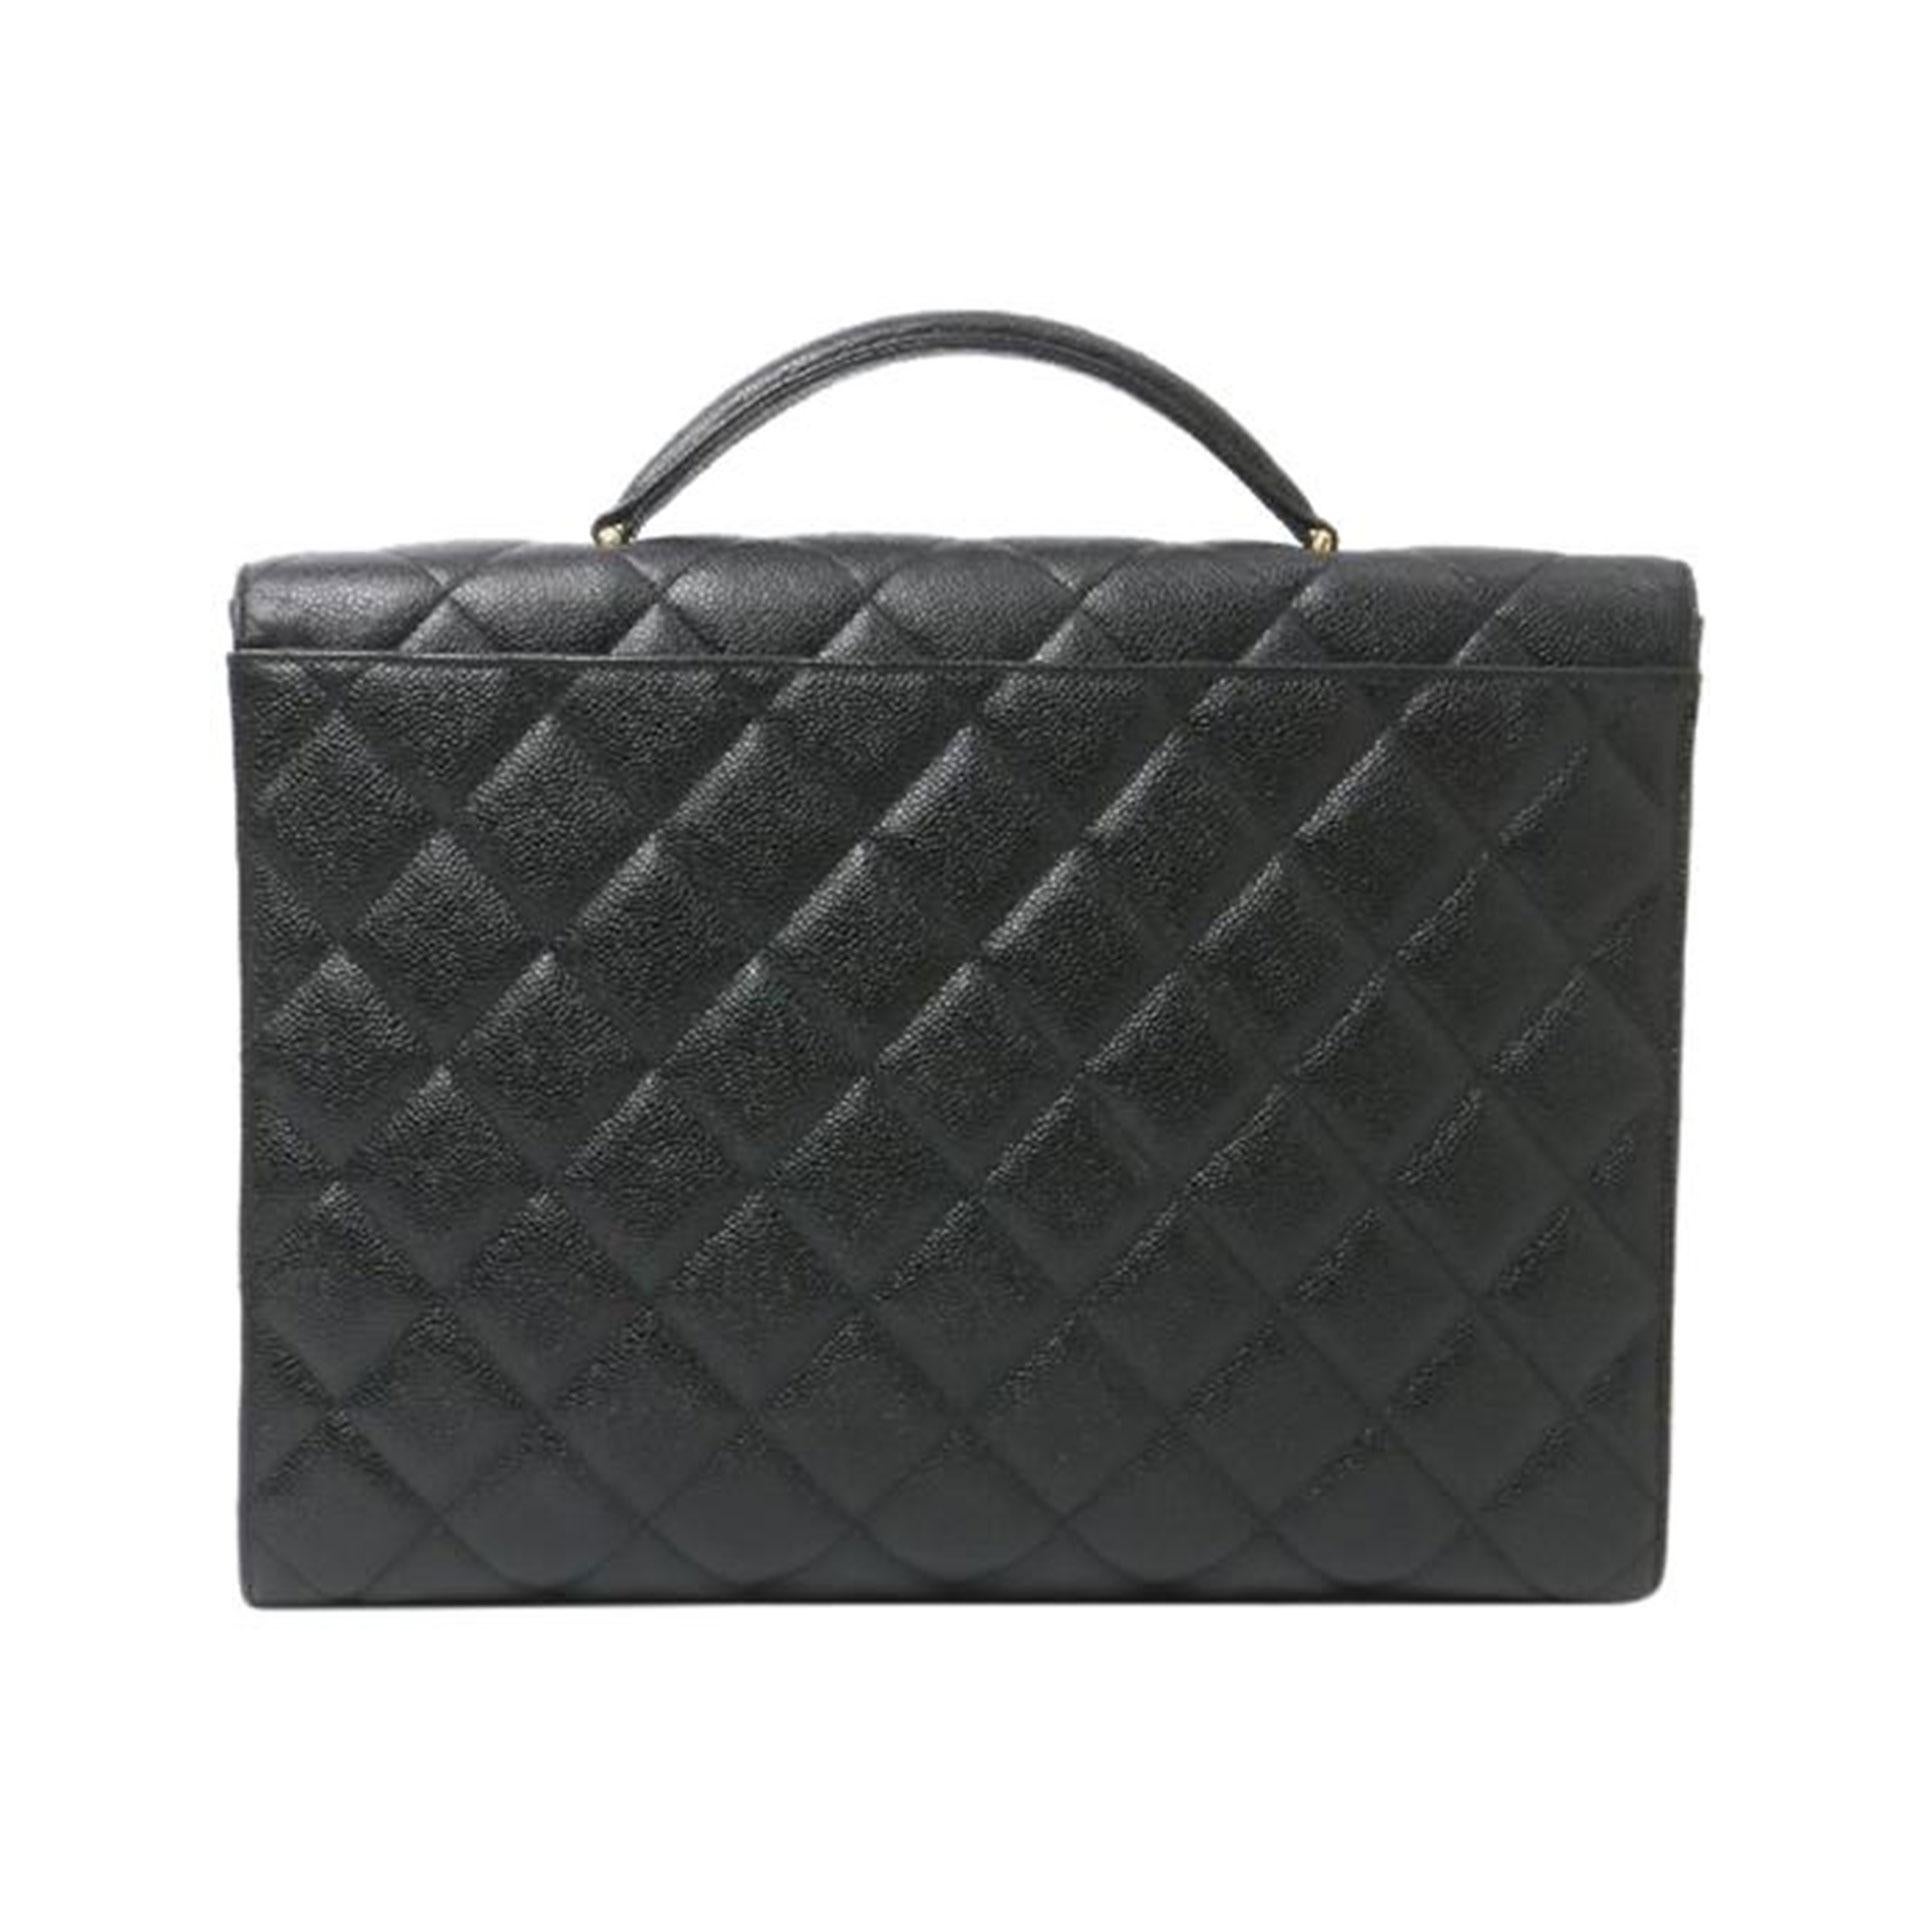 Chanel Classic Flap Portfolio Caviar Briefcase Black Leather Laptop Bag

Gold tone hardware
Black quilted caviar leather
Front flap with CC turn lock closure
Classic rear slip pocket
One Interior slip pocket, one interior zip pocket
1.75